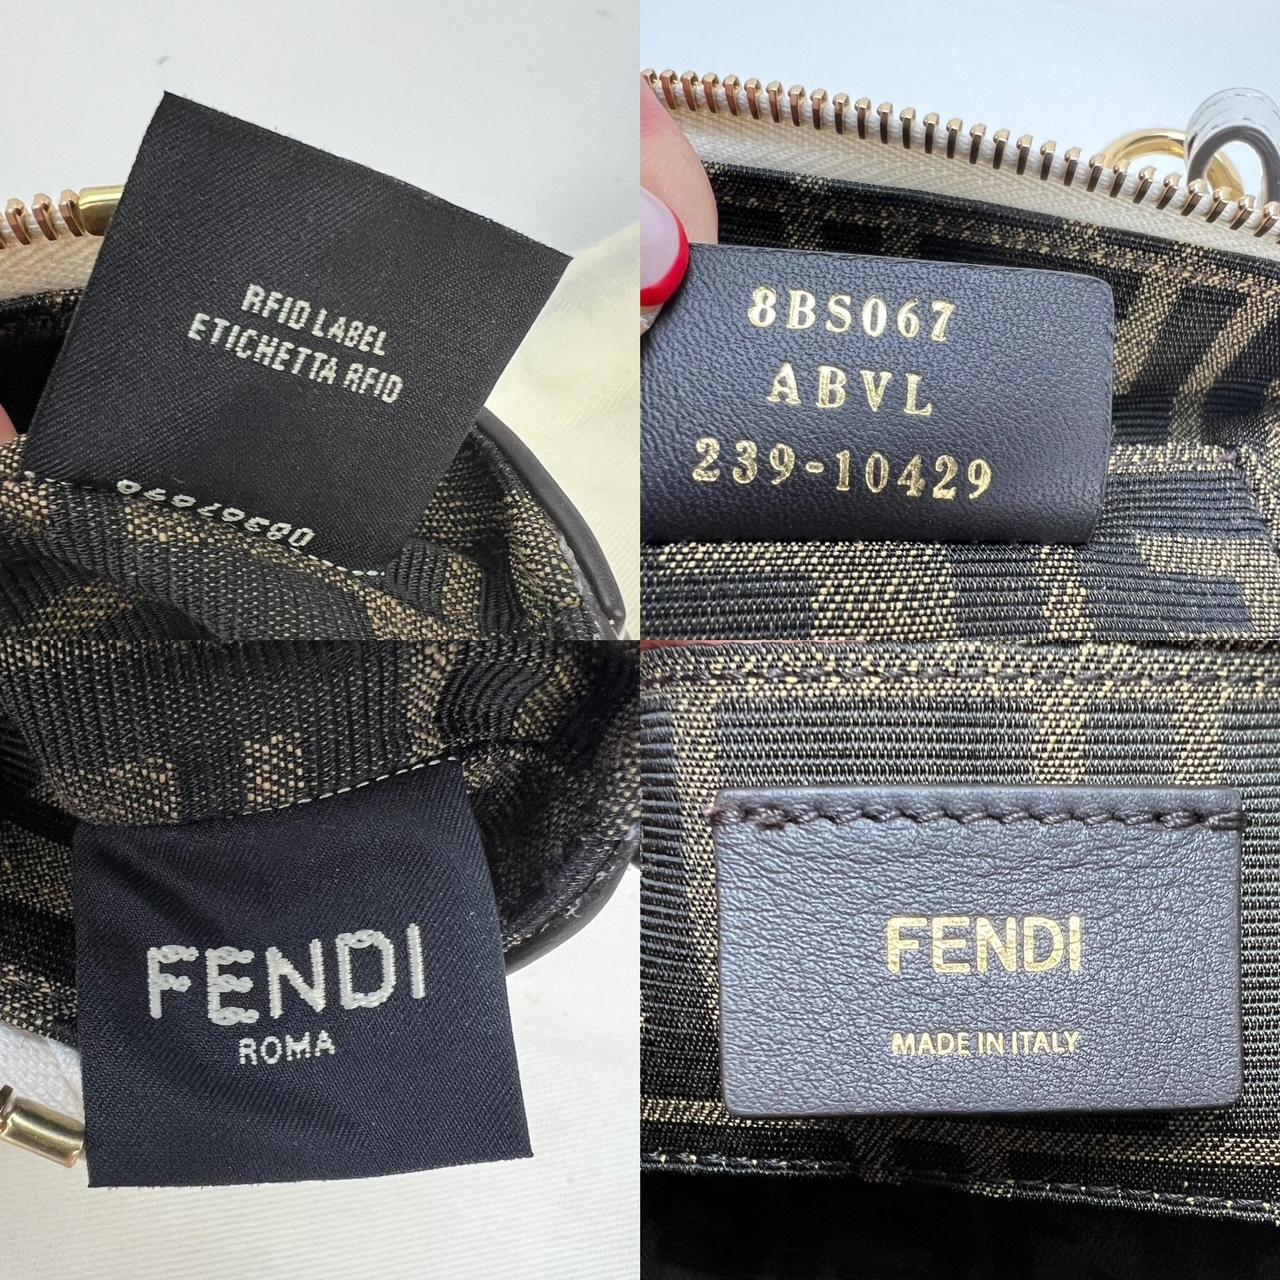 Pre-Owned  100% Authentic
Fendi By The Way Mini Small white leather Boston bag
RATING: A...excellent, near mint, has little to no signs of wear
MATERIAL: calfskin leather
STRAP: Fendi removable adjustable leather 
strap 42'' to 44 in long 
DROP: